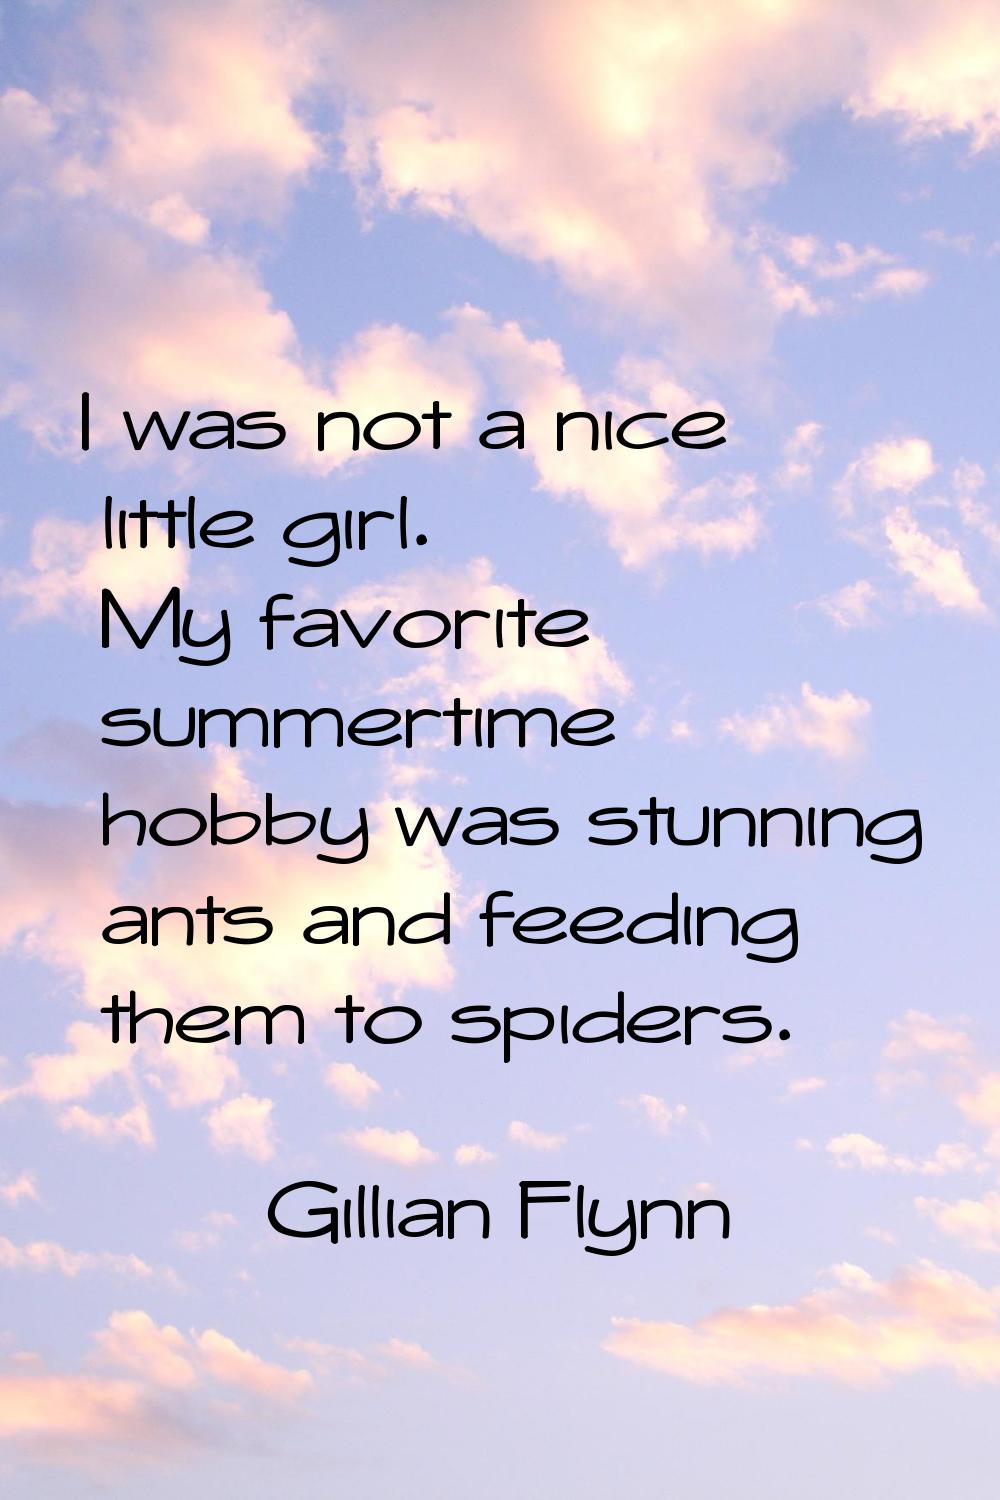 I was not a nice little girl. My favorite summertime hobby was stunning ants and feeding them to sp